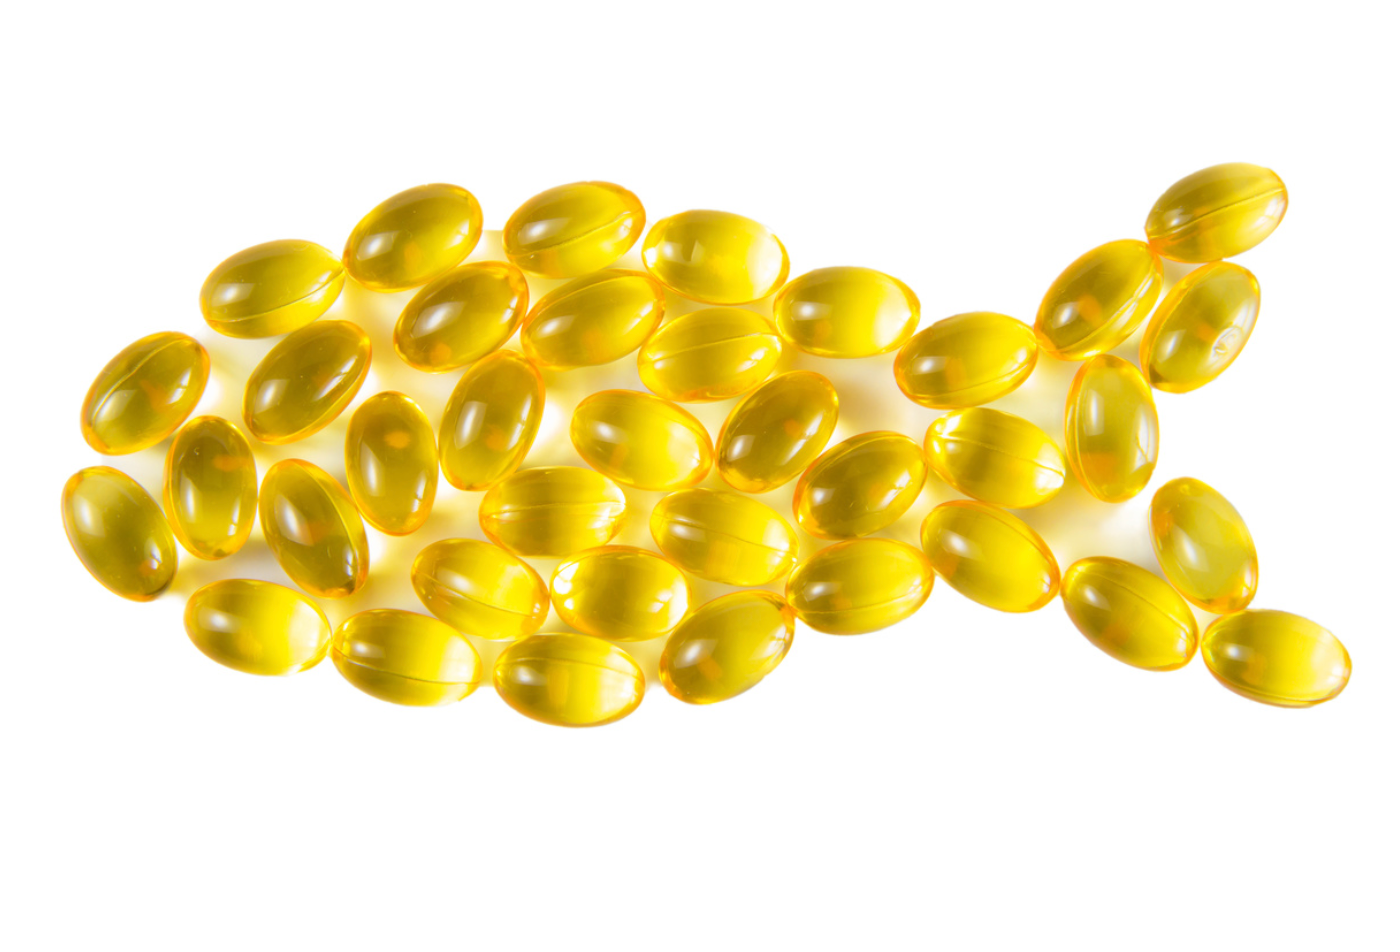 Cod Liver Oil Supplementation Not Found to Impact COVID-19 Prevention 